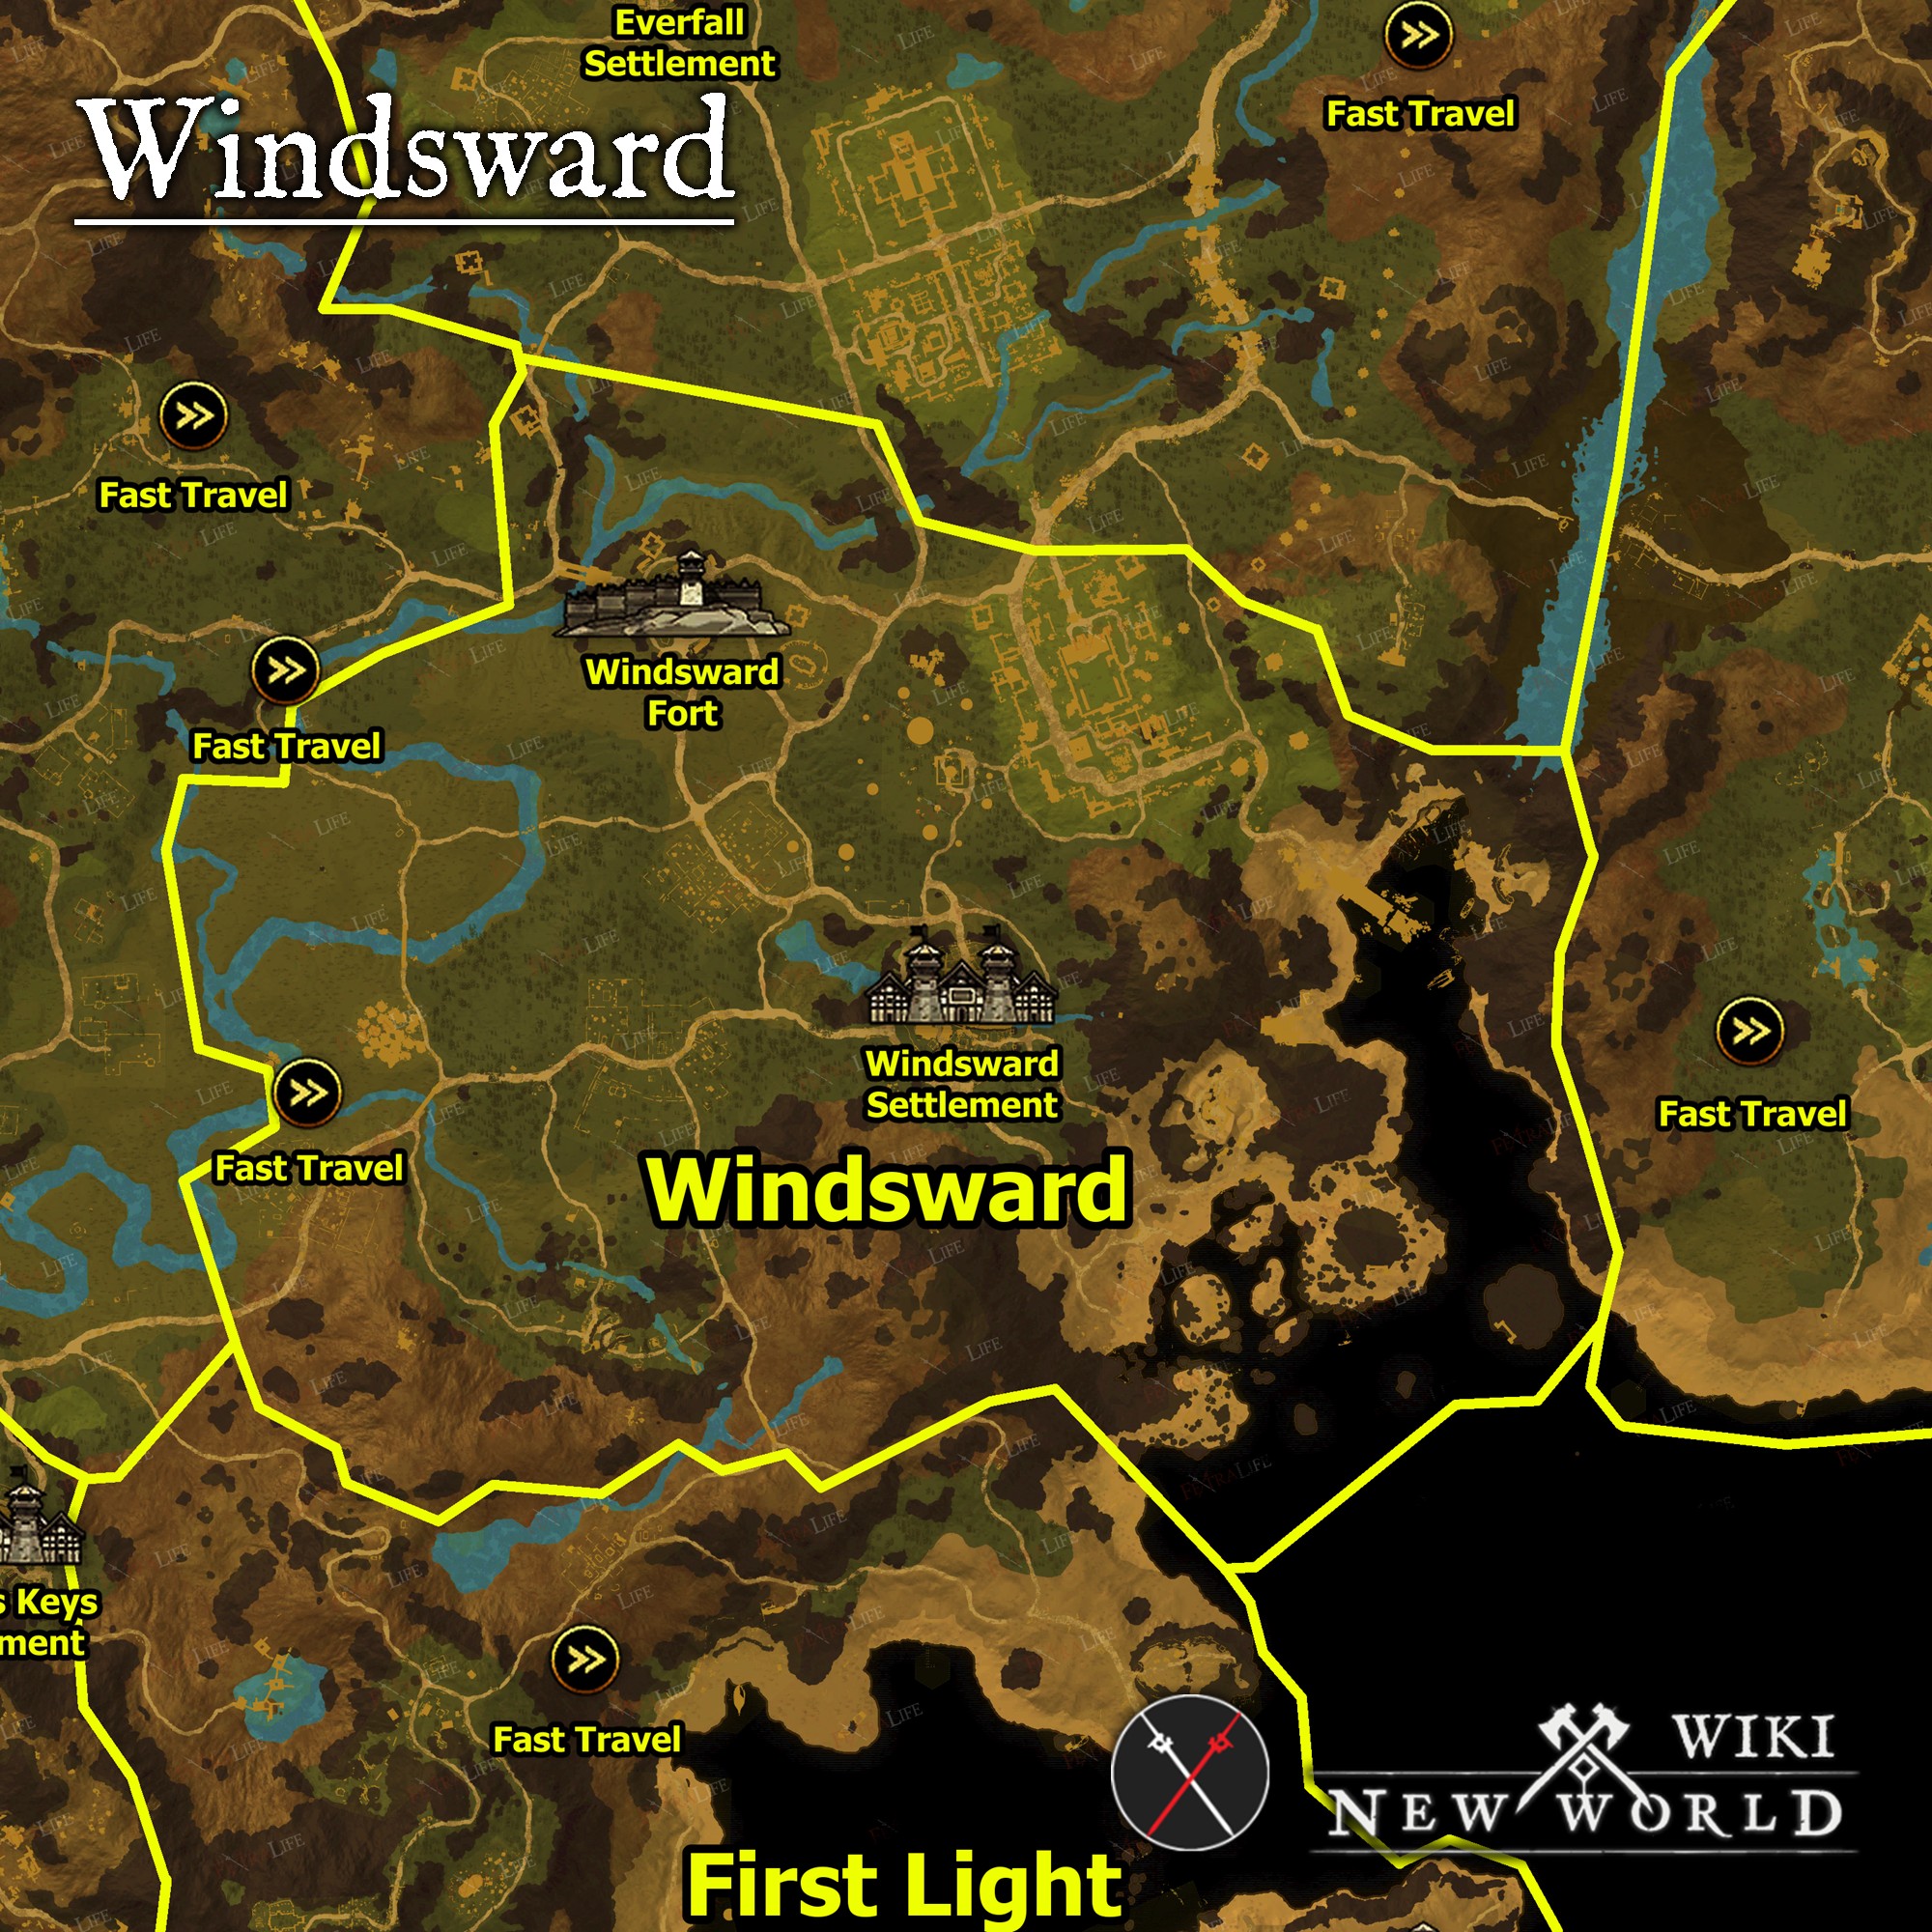 Windsward Map for New World MMO